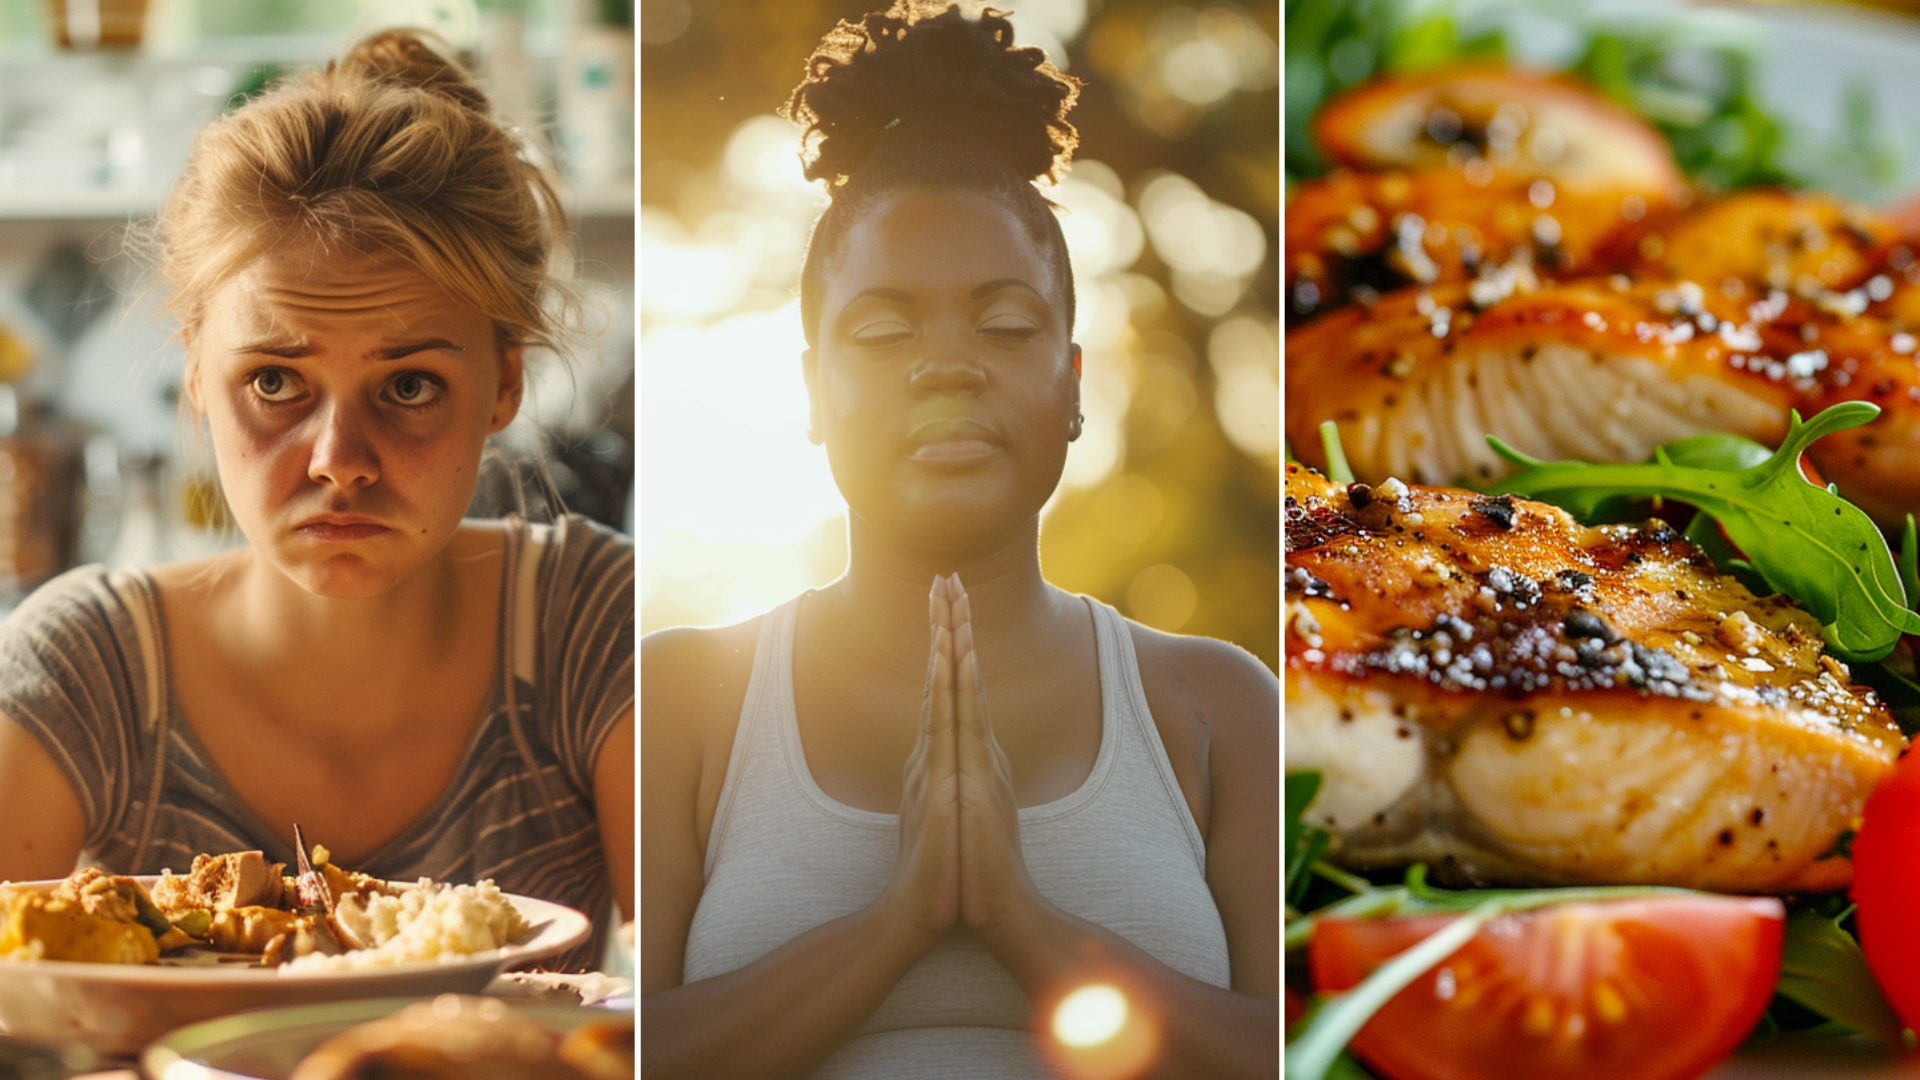 An image of a white woman being emotional in the kitchen eating and having a lot of food on the table captures frowning of the forehead and uneasiness. slightly overweight black woman doing group yoga.